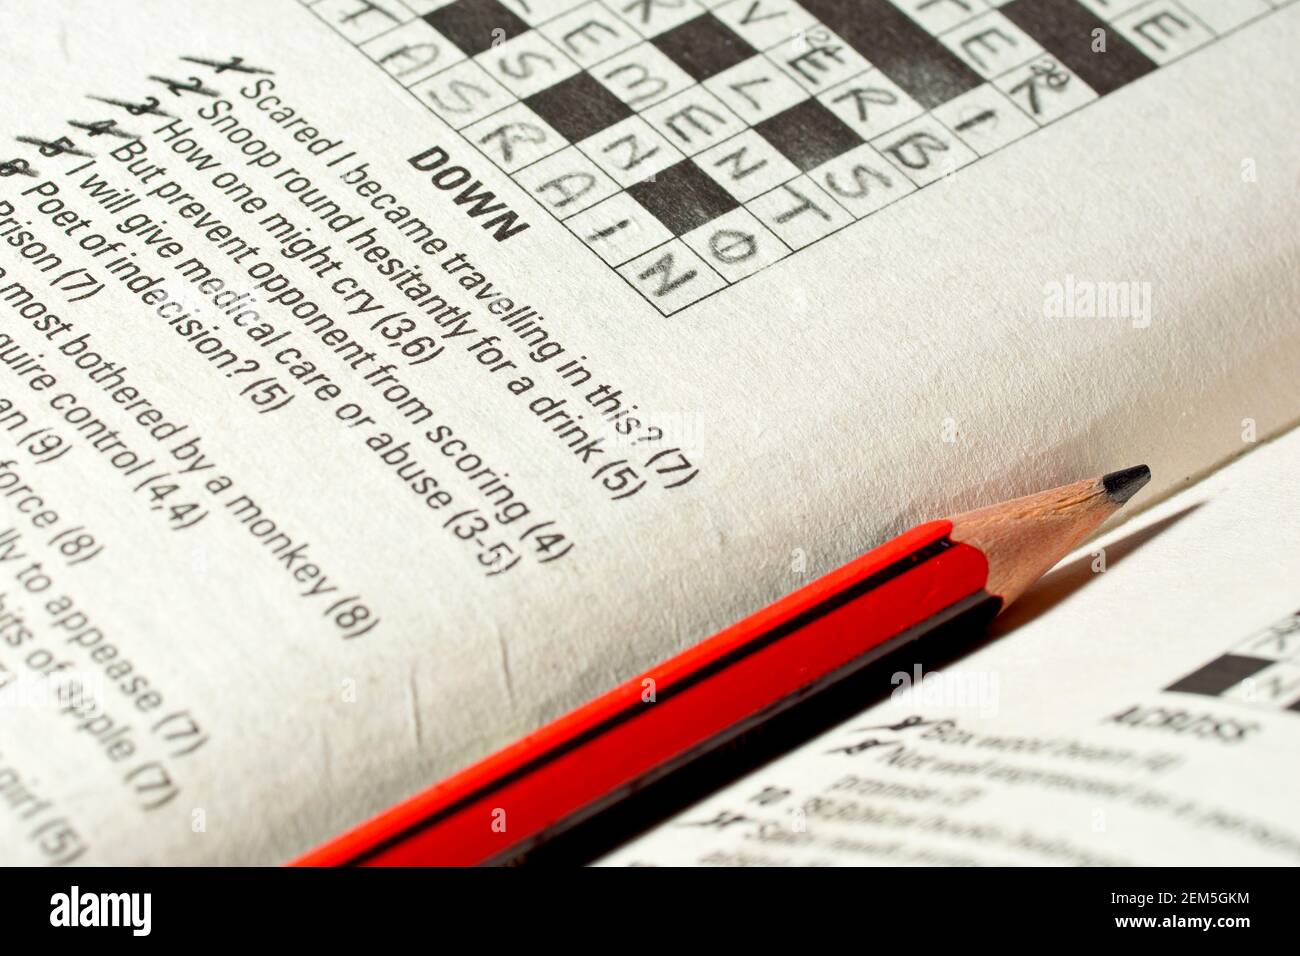 A close up of a pencil lying on a crossword puzzle book, the crossword itself finished. Concept of taking a break. Stock Photo